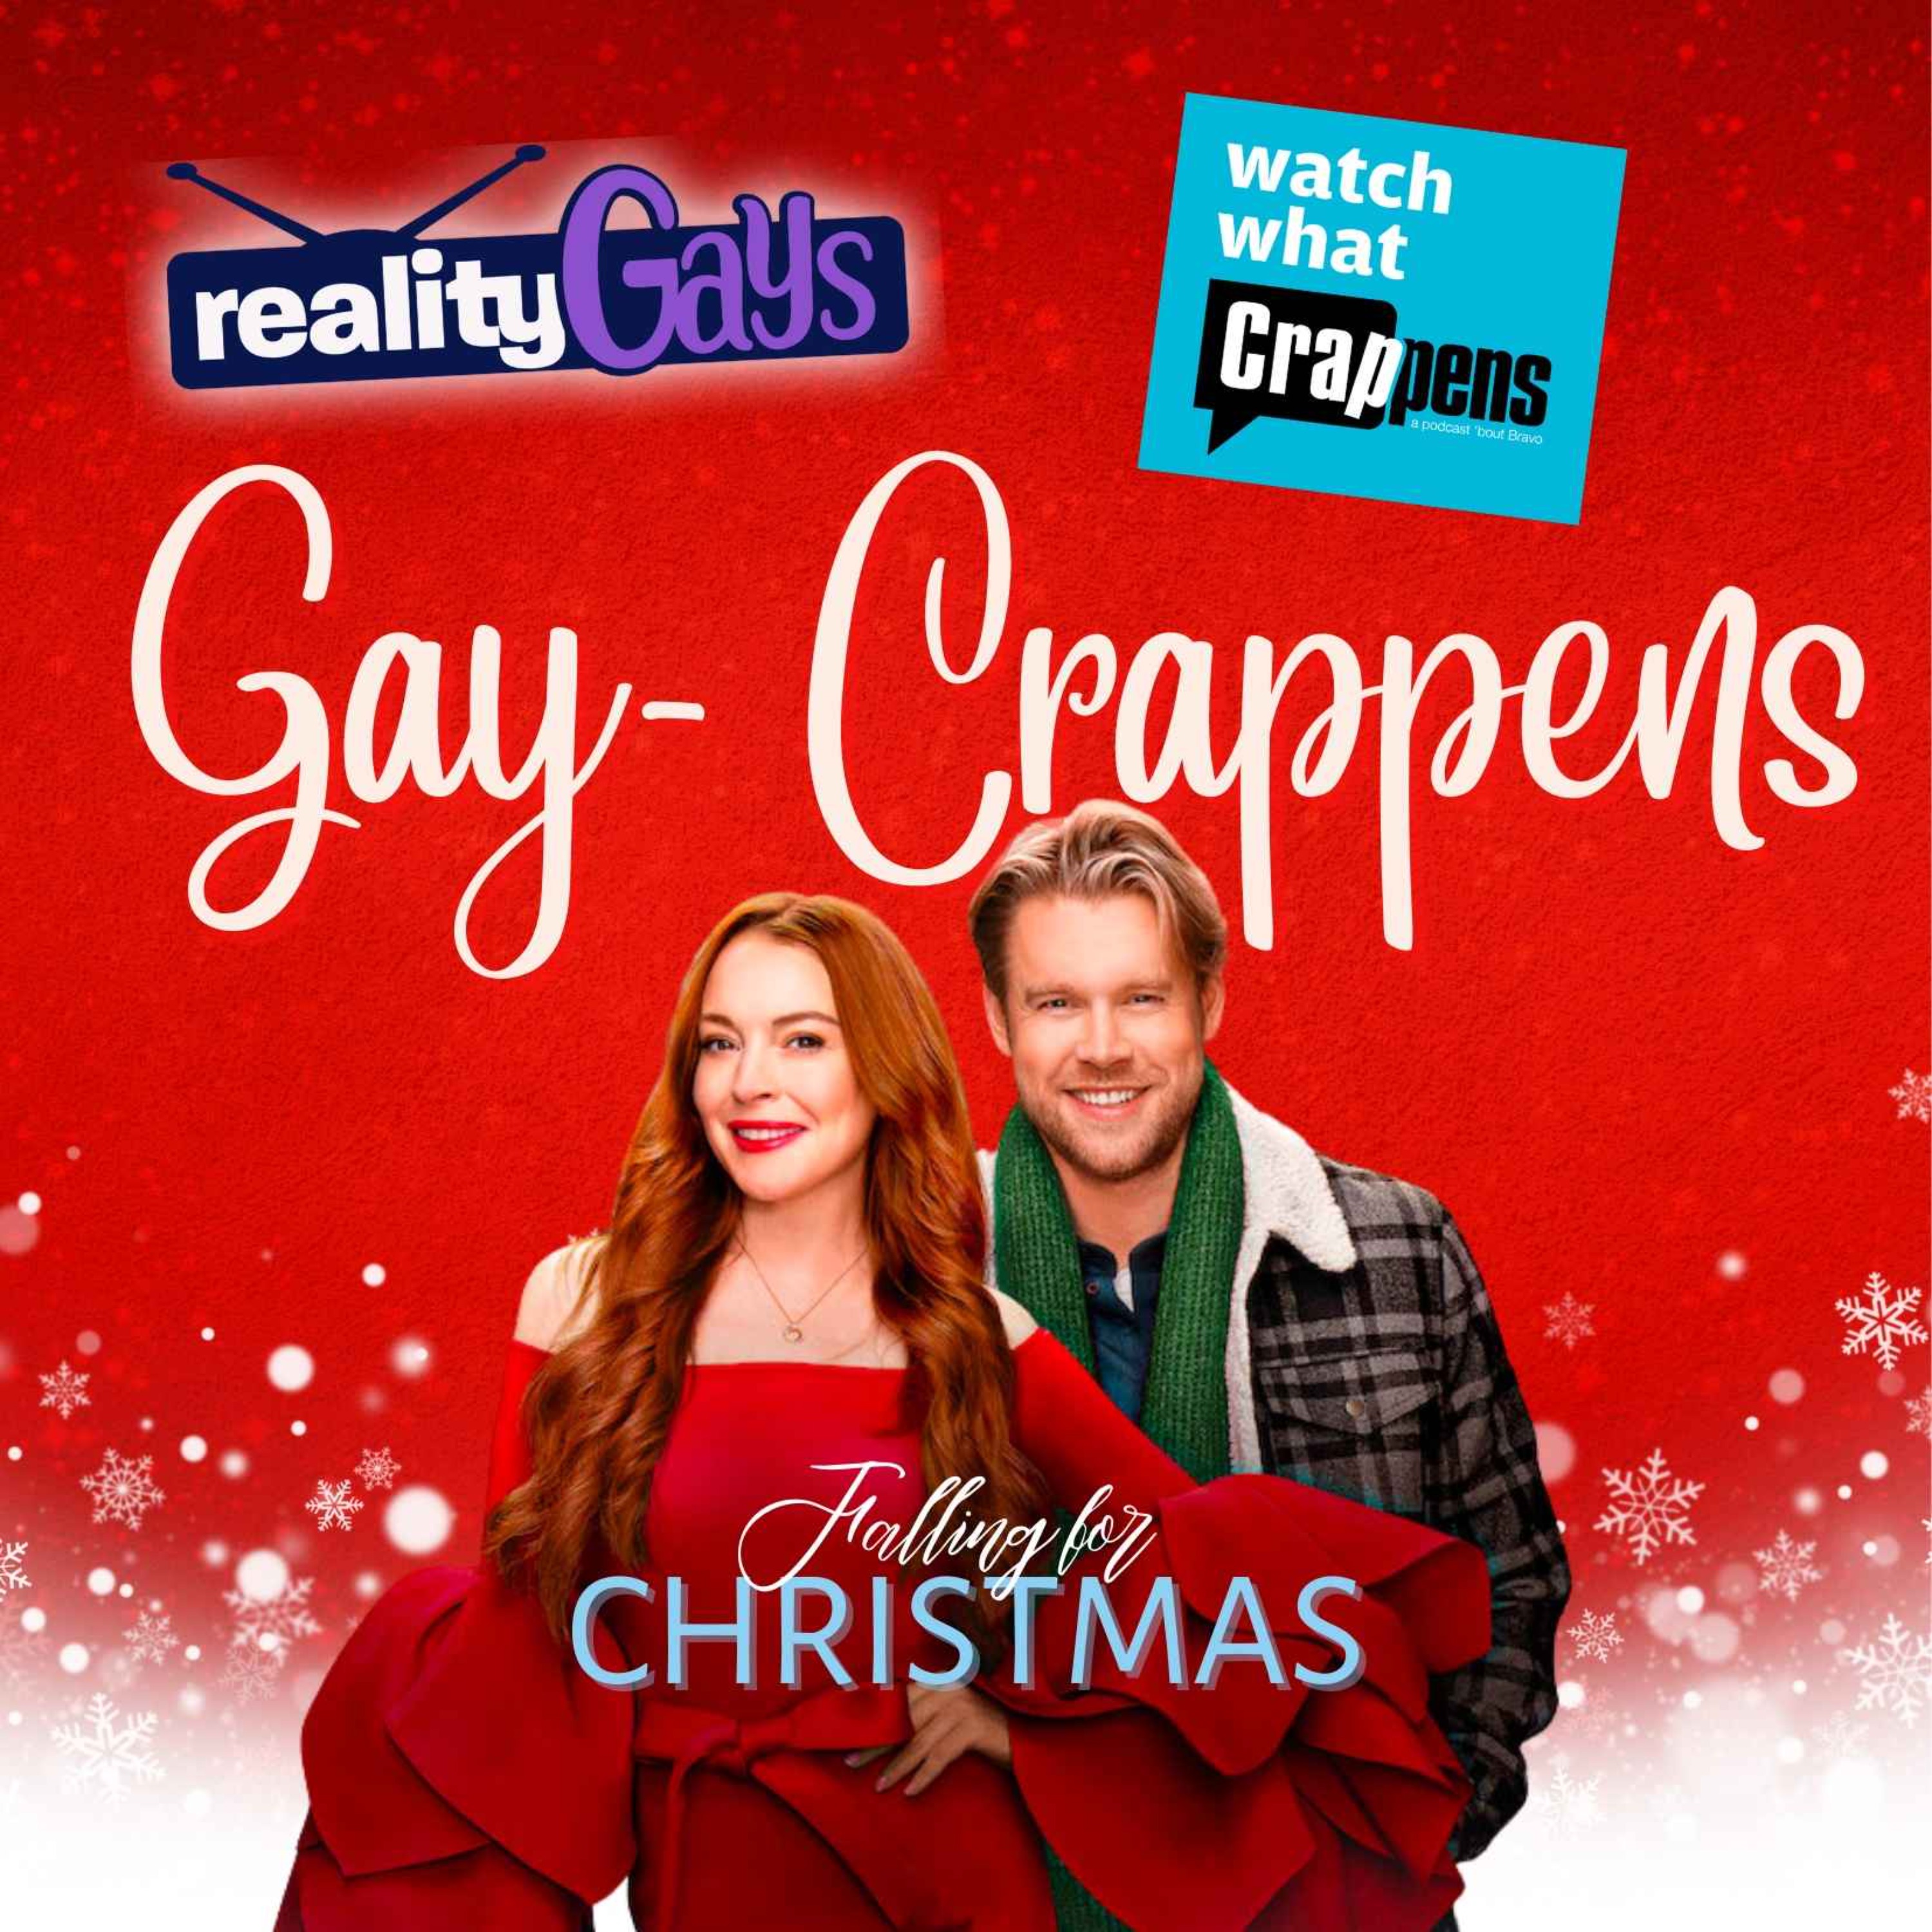 Reality Gays: Trash TV and GayDD with Mattie and Poodle - Gay Crappens: Falling for Christmas Part 2 of 4